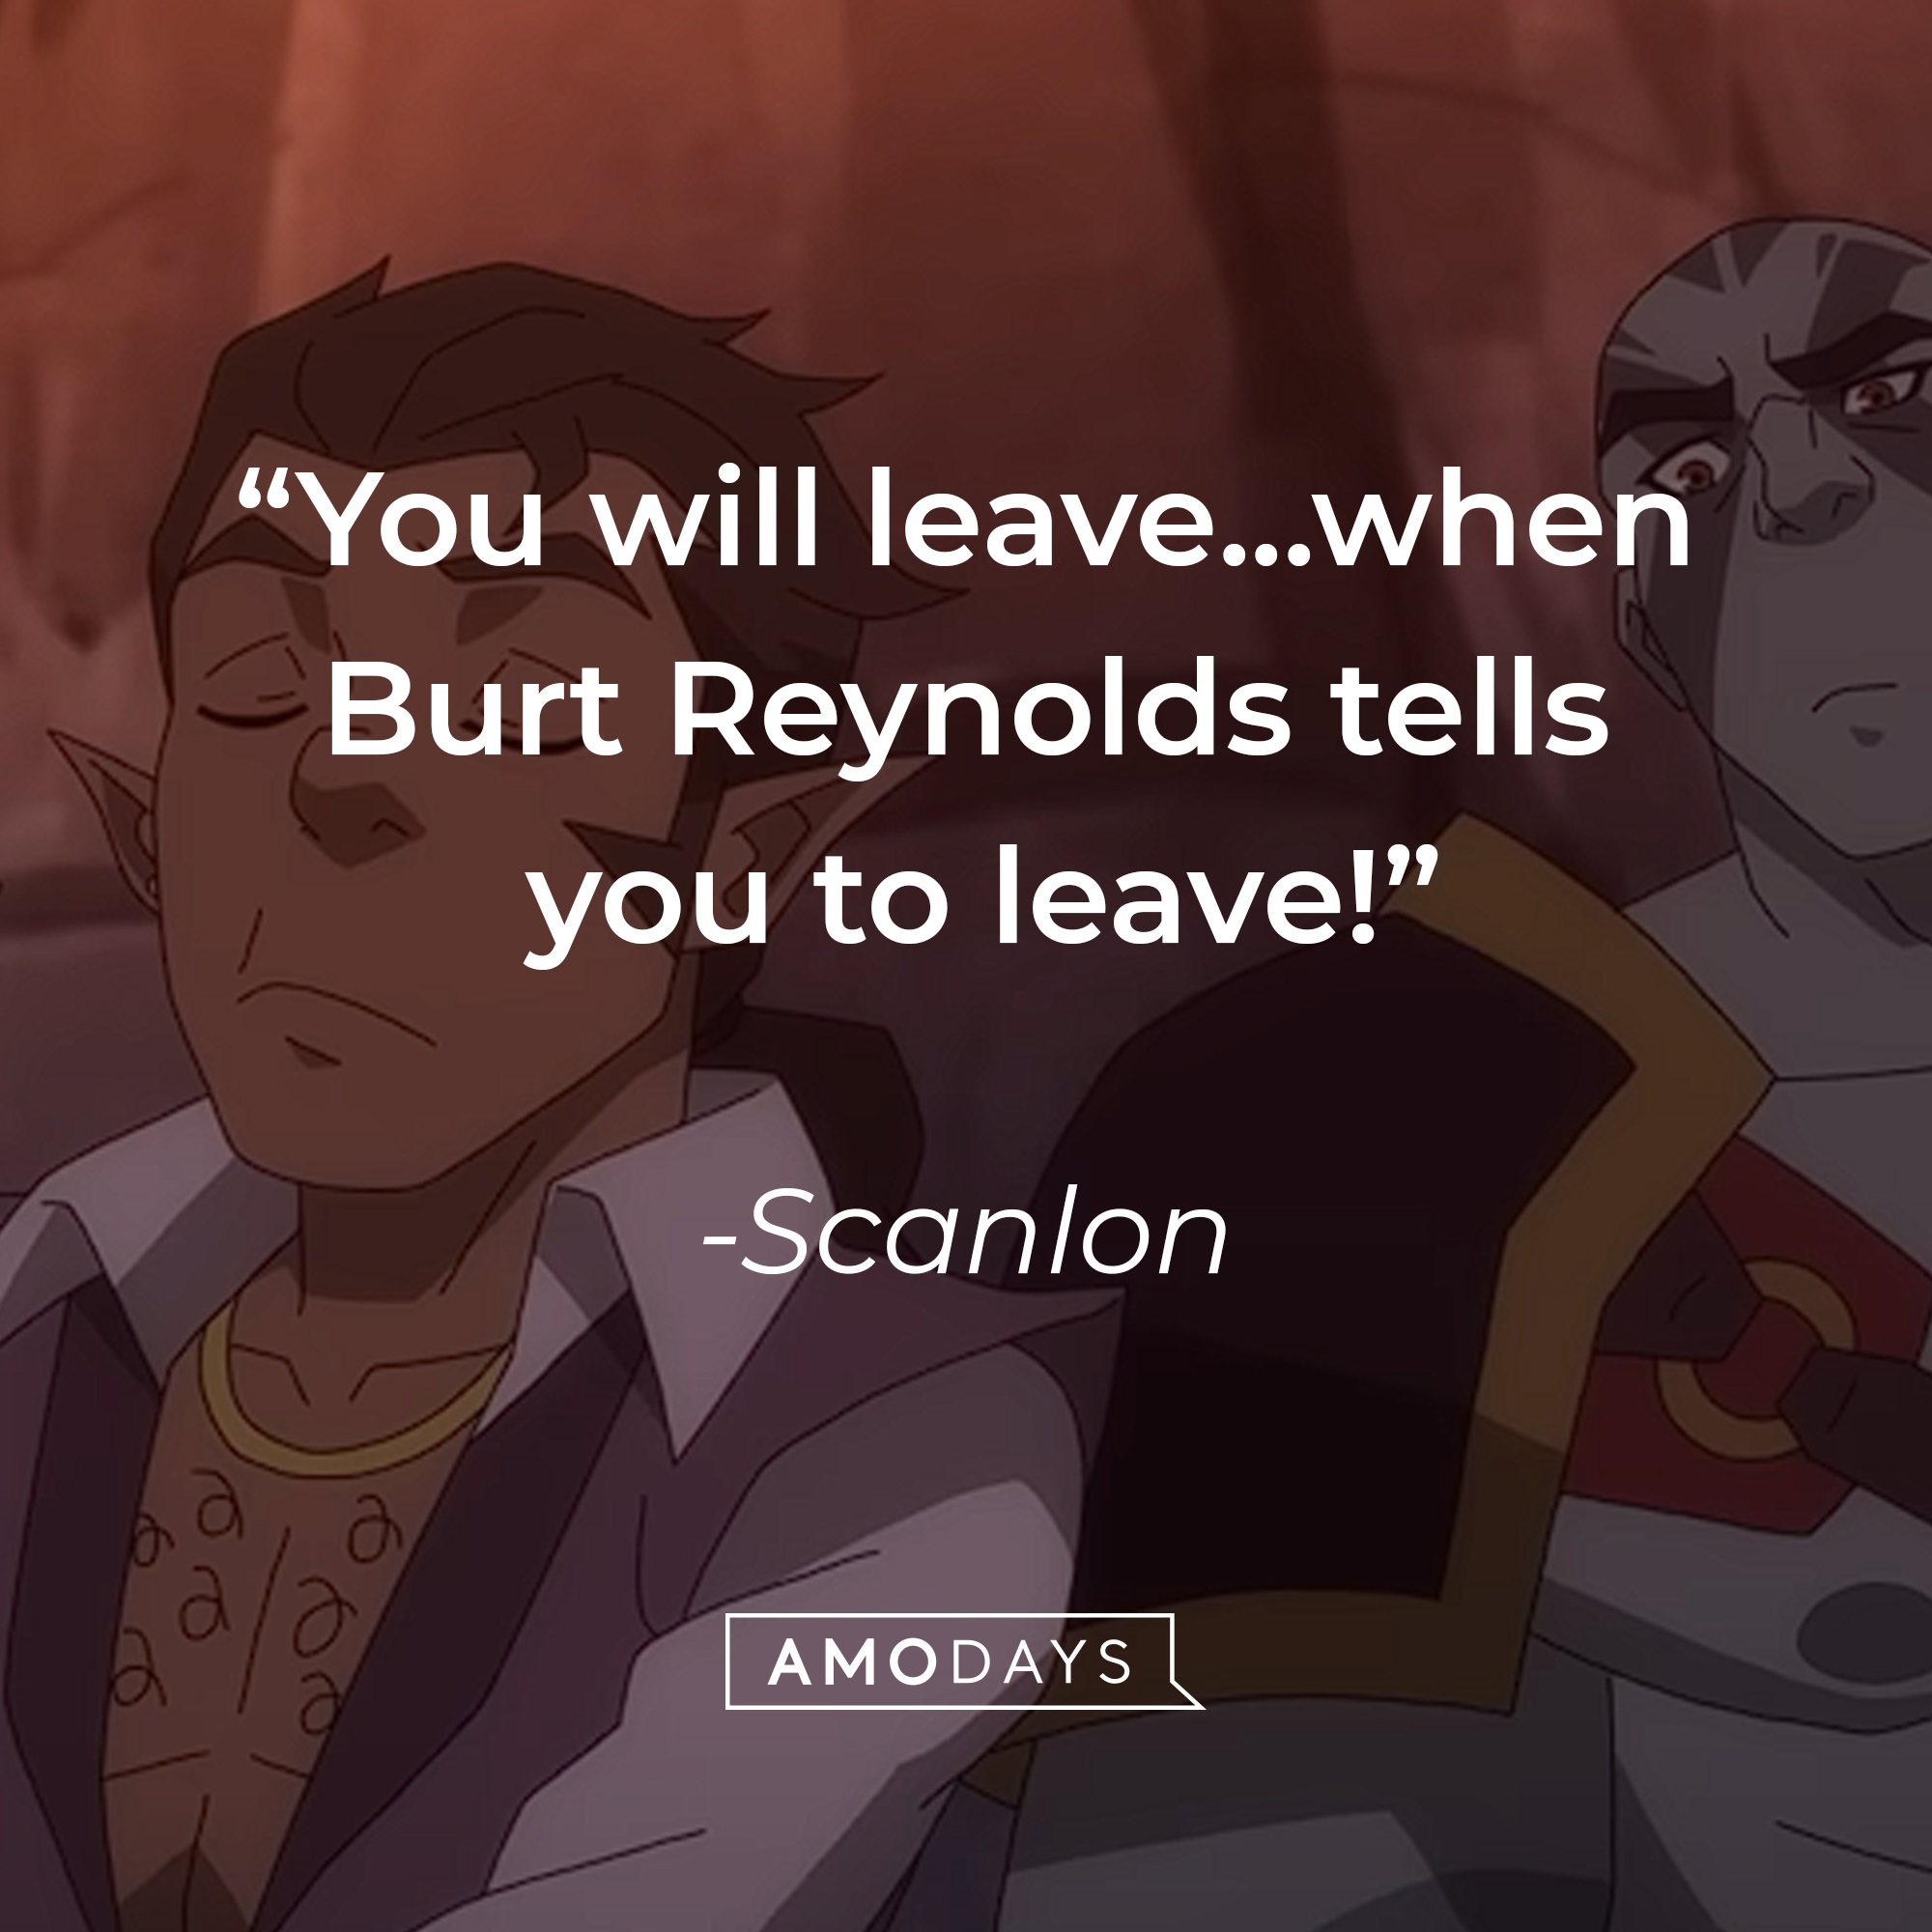 An image of Scanlon with his quote: “You will leave… when Burt Reynolds tells you to leave!” | Source: youtube.com/PrimeVideo